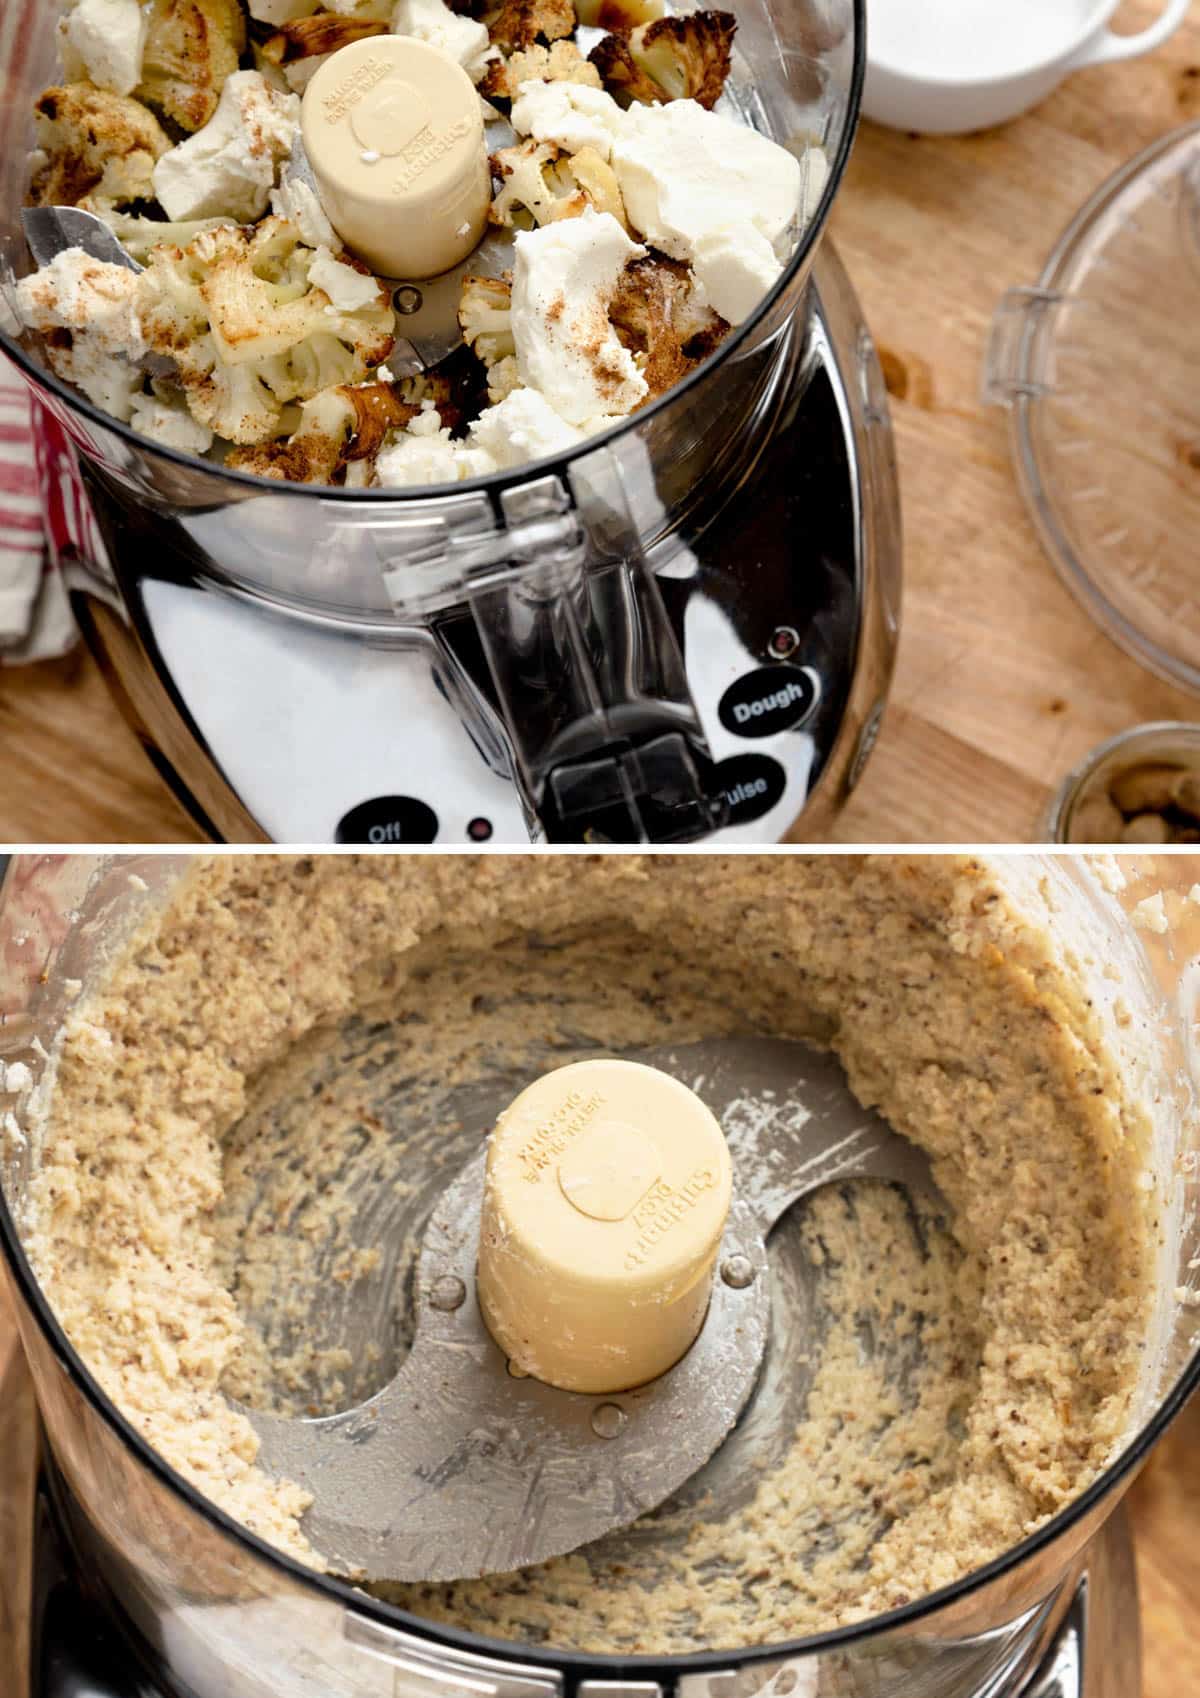 top photo: roasted cauliflower, garlic, goat cheese, and seasonings in the bowl of a food processor; bottom photo: the same mixture pureed in the food processor